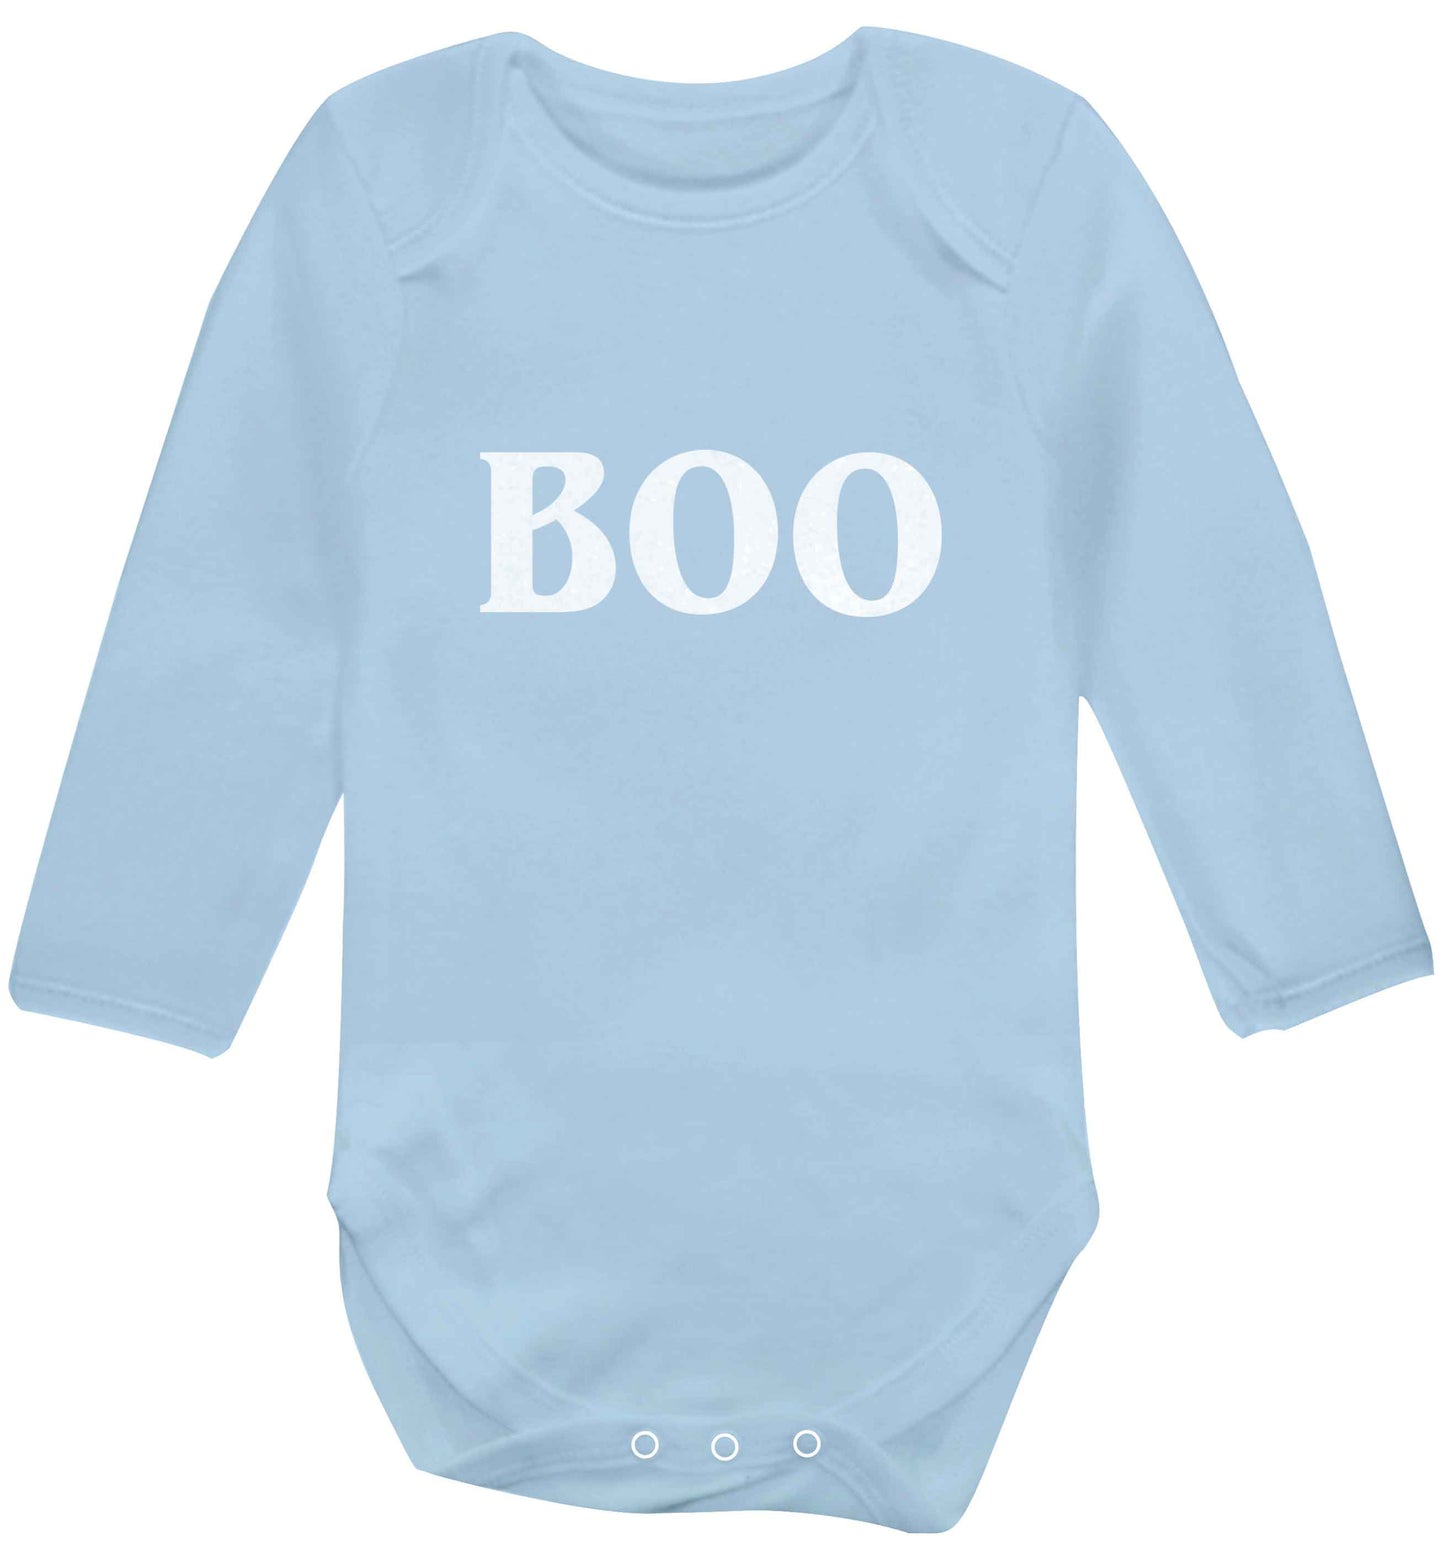 Boo baby vest long sleeved pale blue 6-12 months